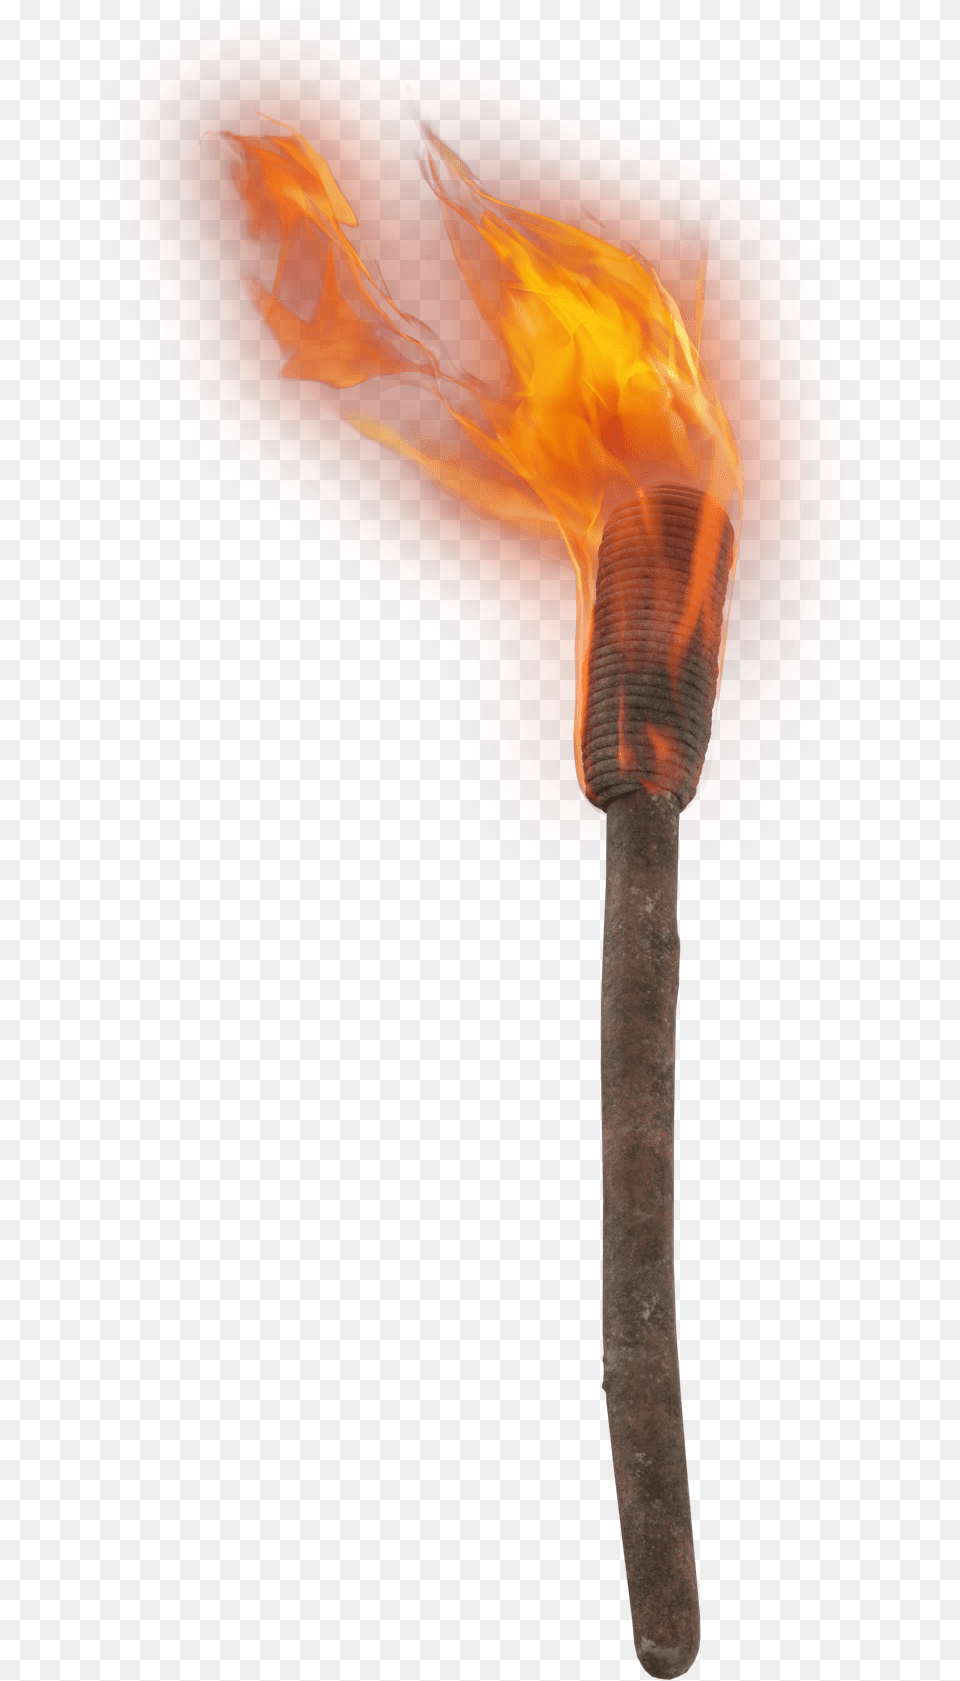 Hand Torch Purepng Cc0 Torch, Light Png Image